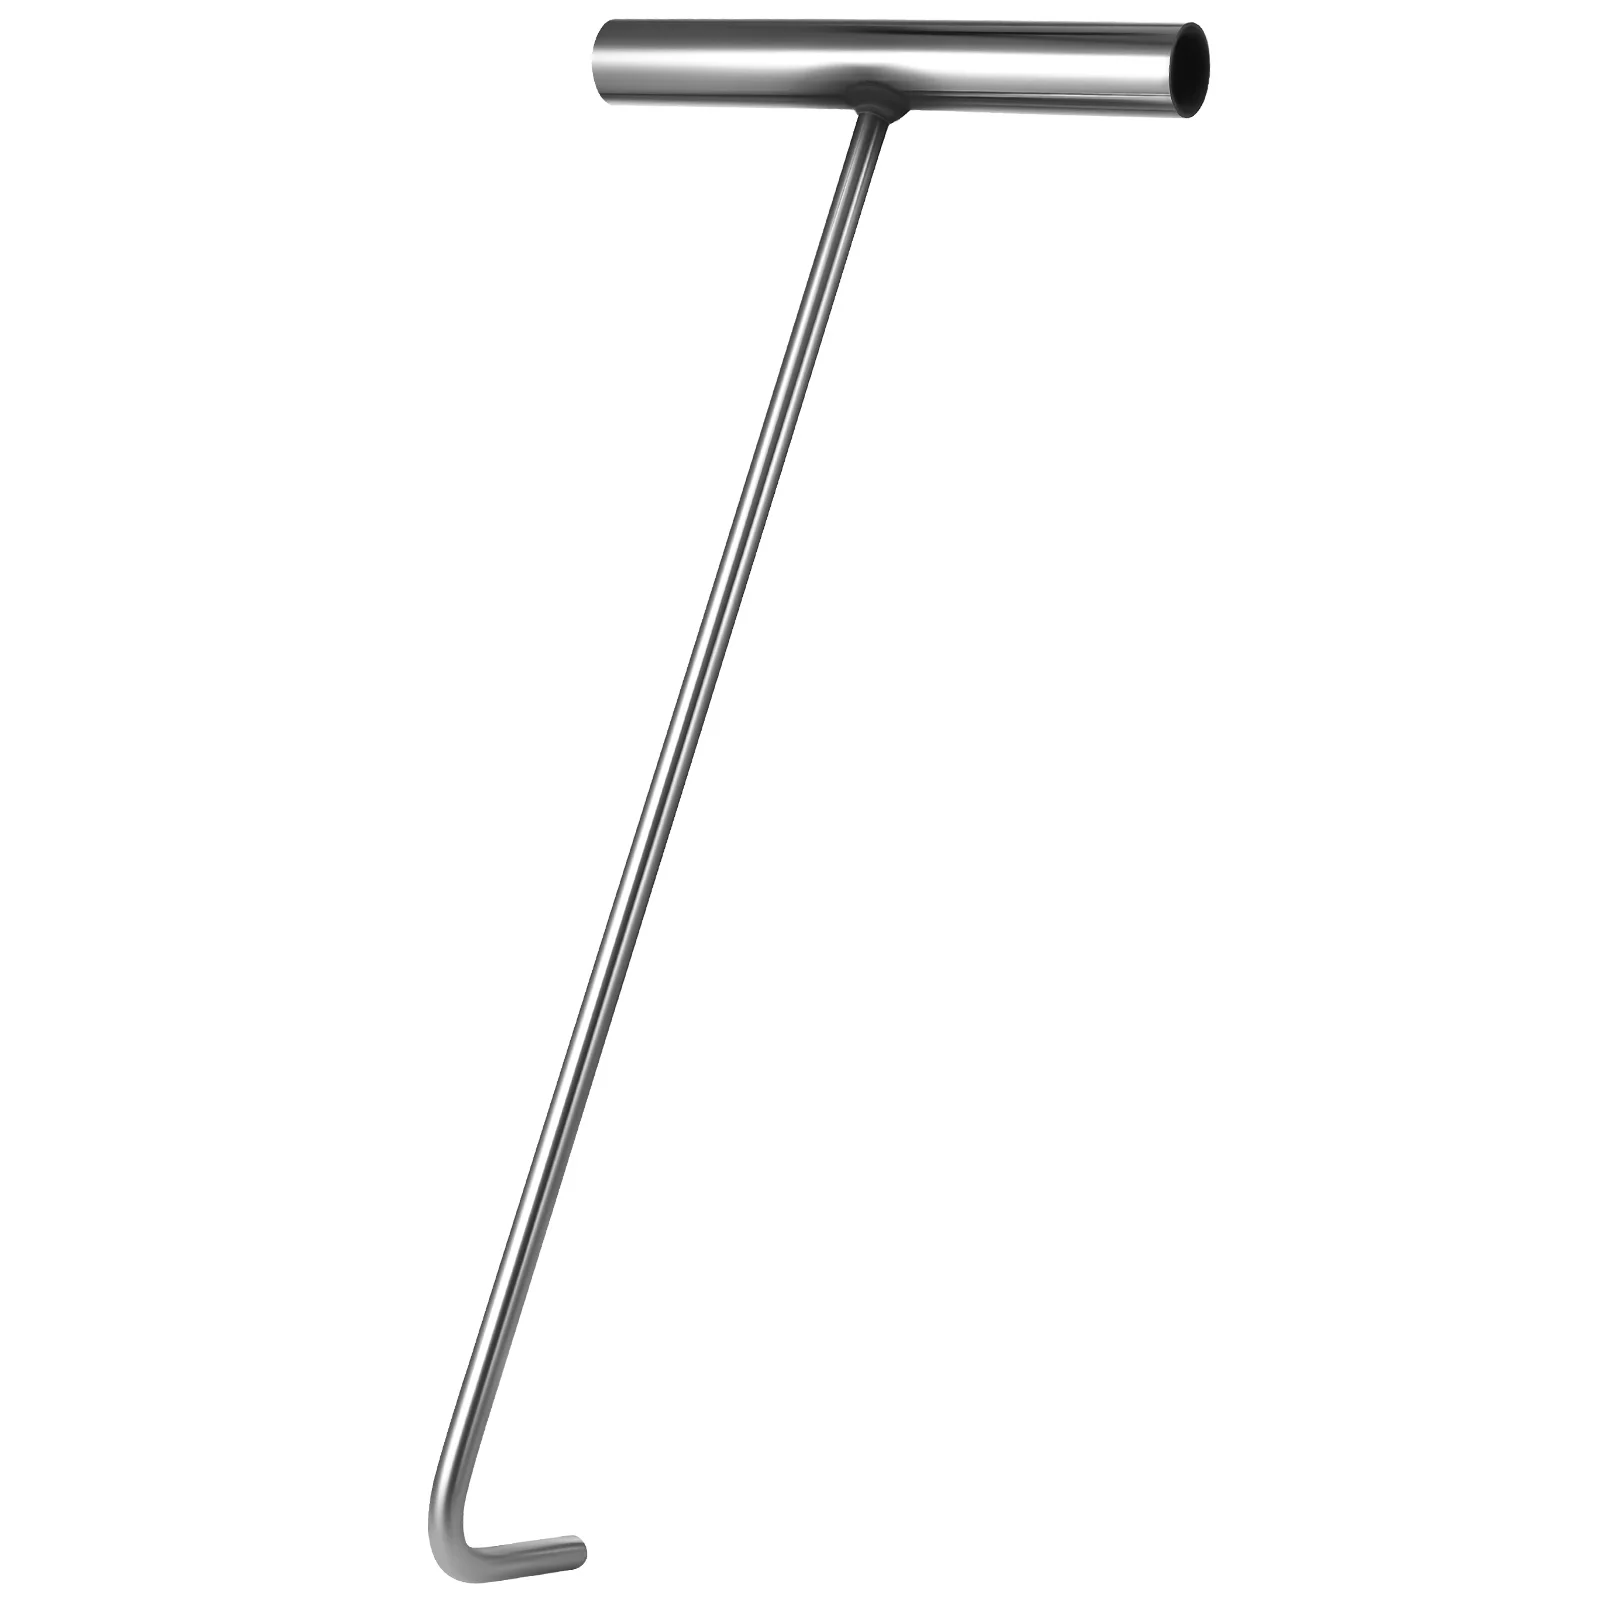 

Stainless Steel T Hooks T Hook Spring Pulling Tool for Trampoline Springs Open Manhole Covers